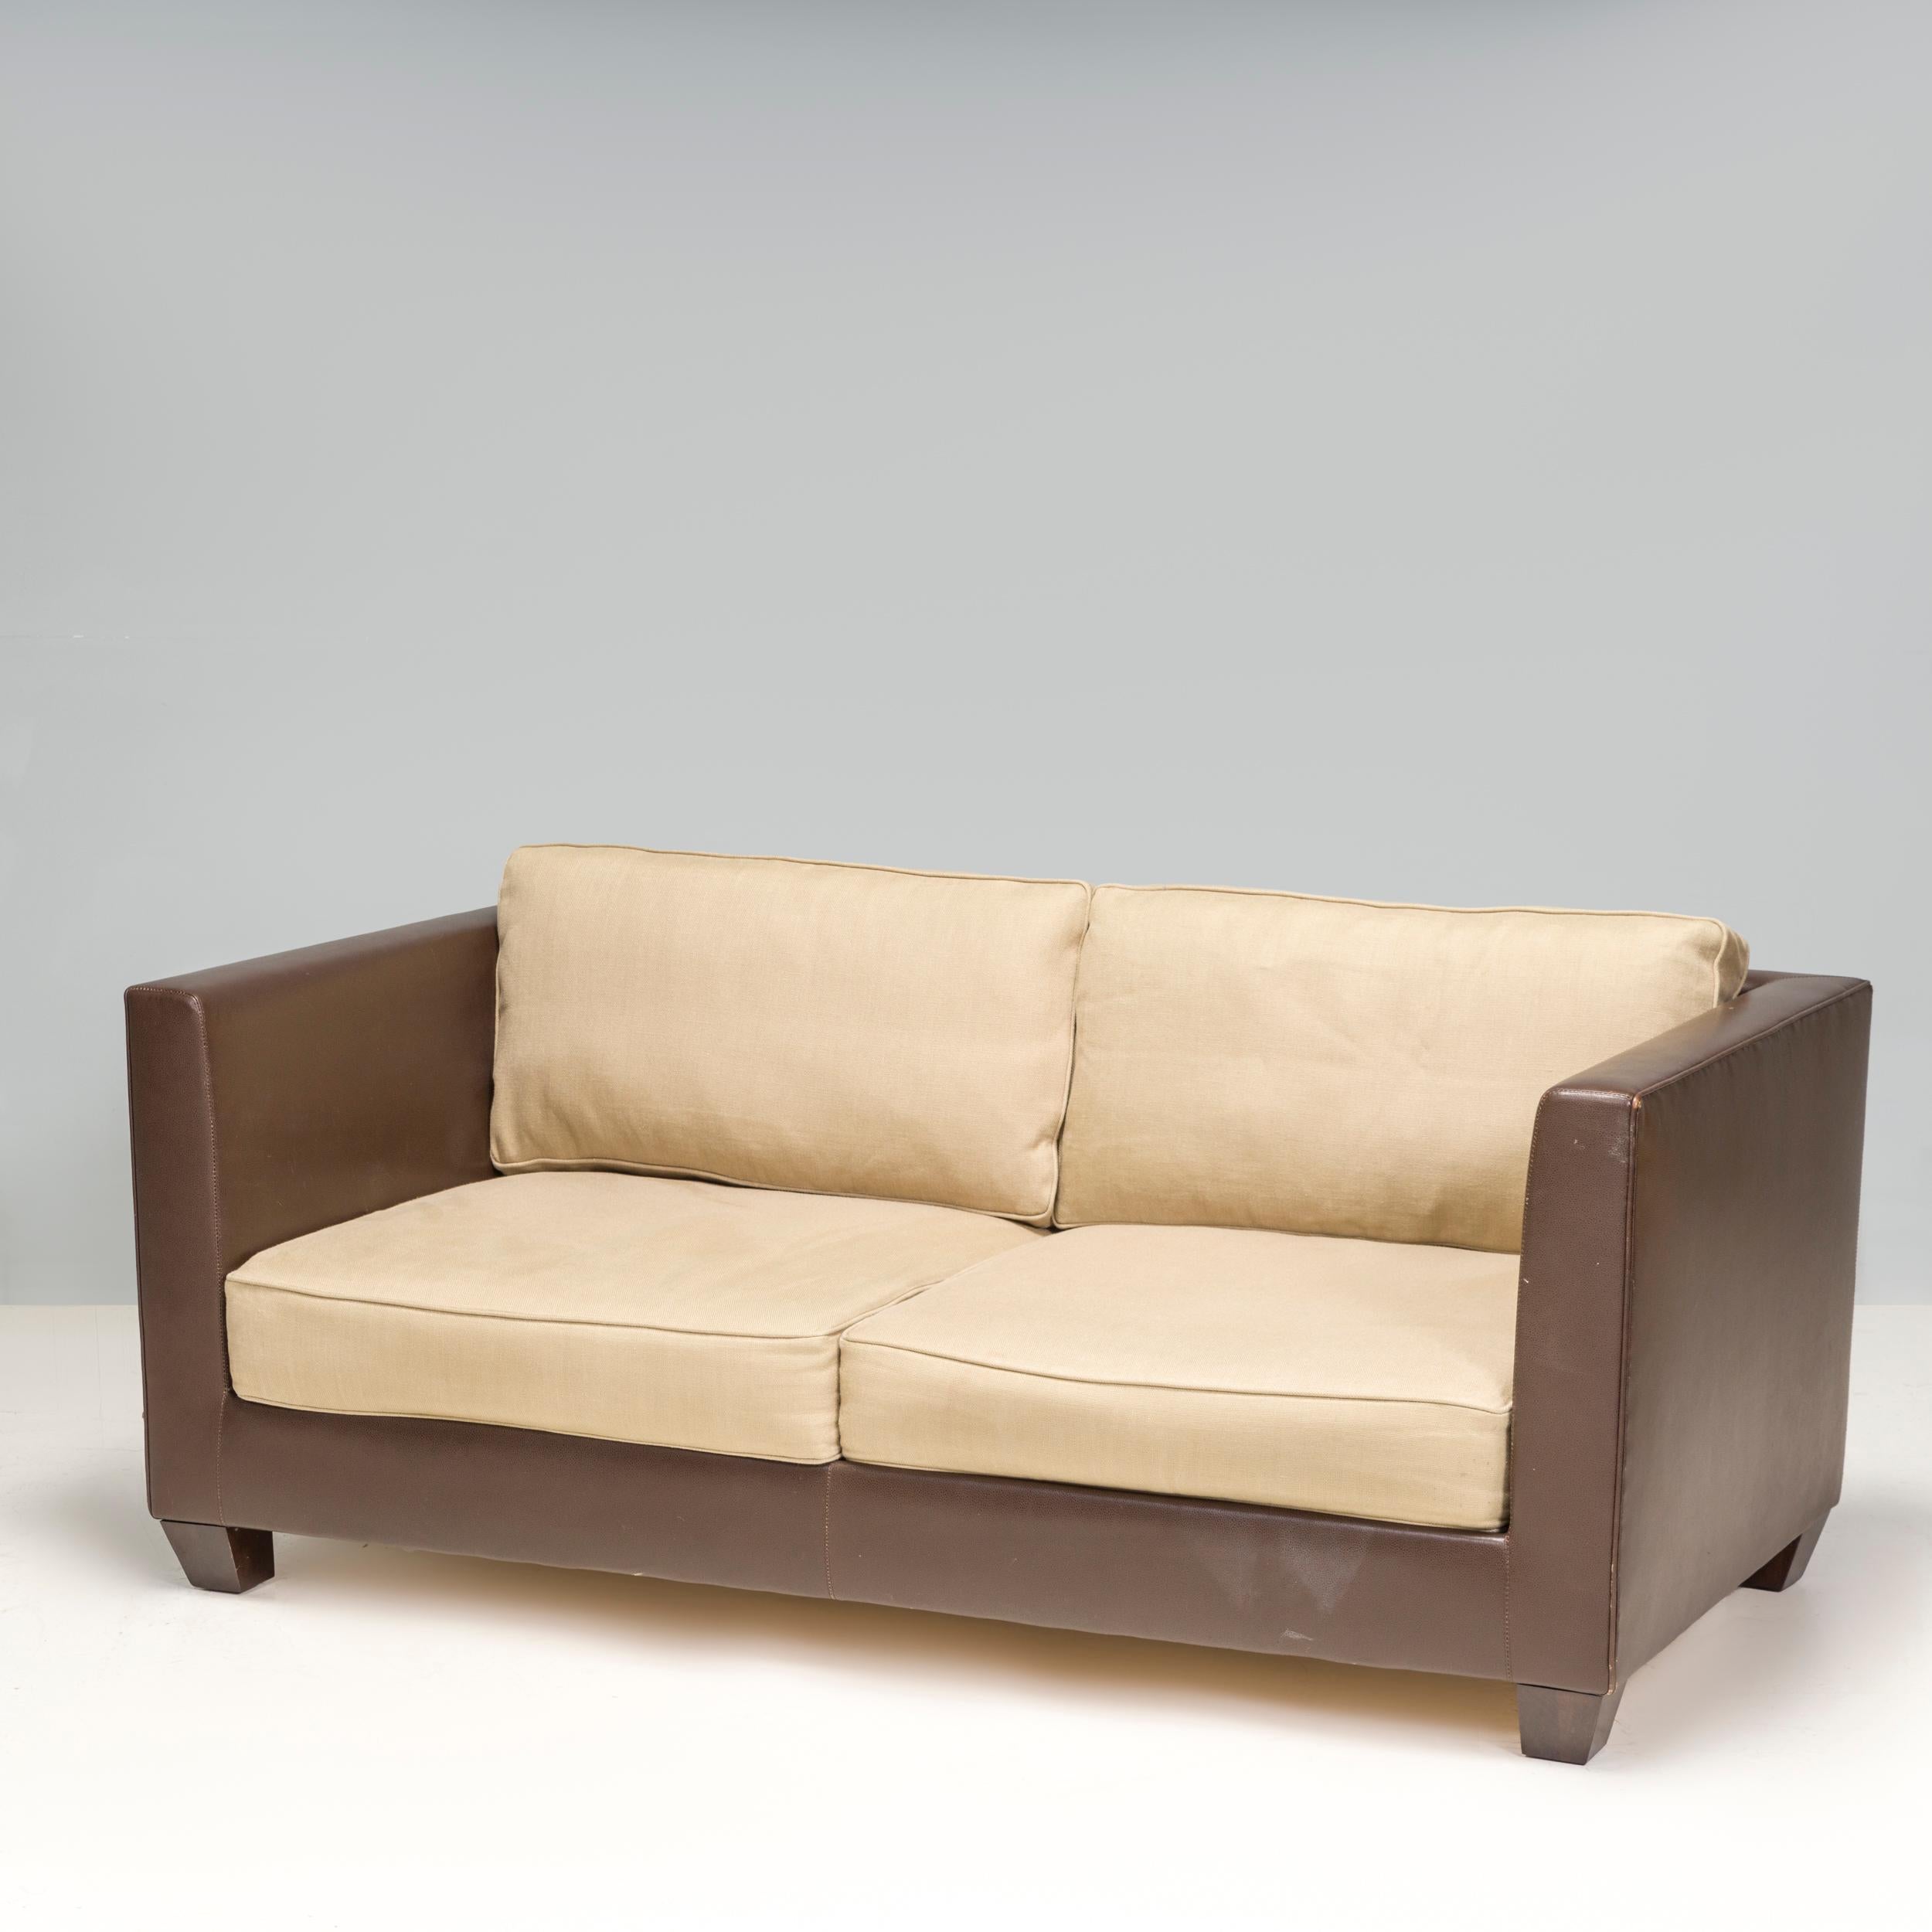 This Philippe Hurel design is a contemporary form fit with a versatile look that suits an array of interiors. Philippe Hurel has over 100 years of creation, craftsmanship and inspiration. This refined leather sofa look features soft cushions and